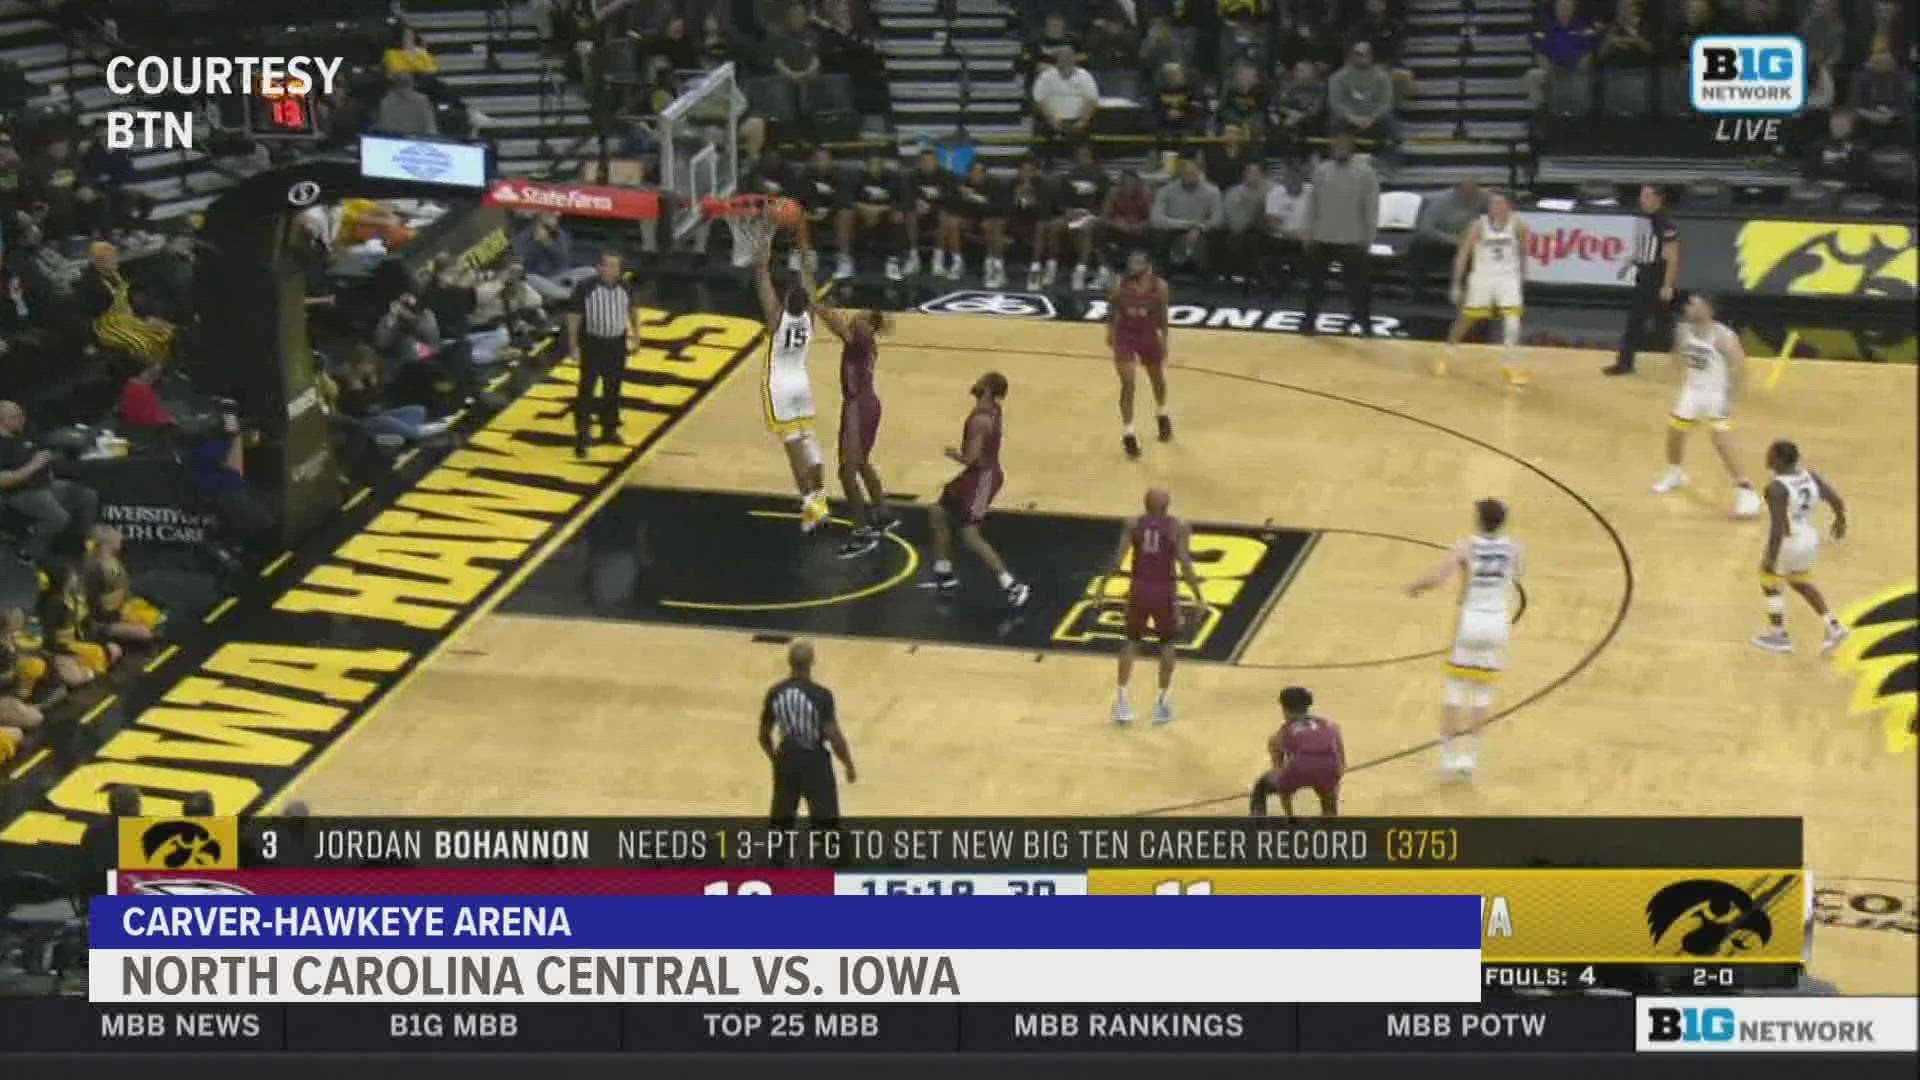 Murray has 27 points, 21 rebounds; Iowa beats NC Central